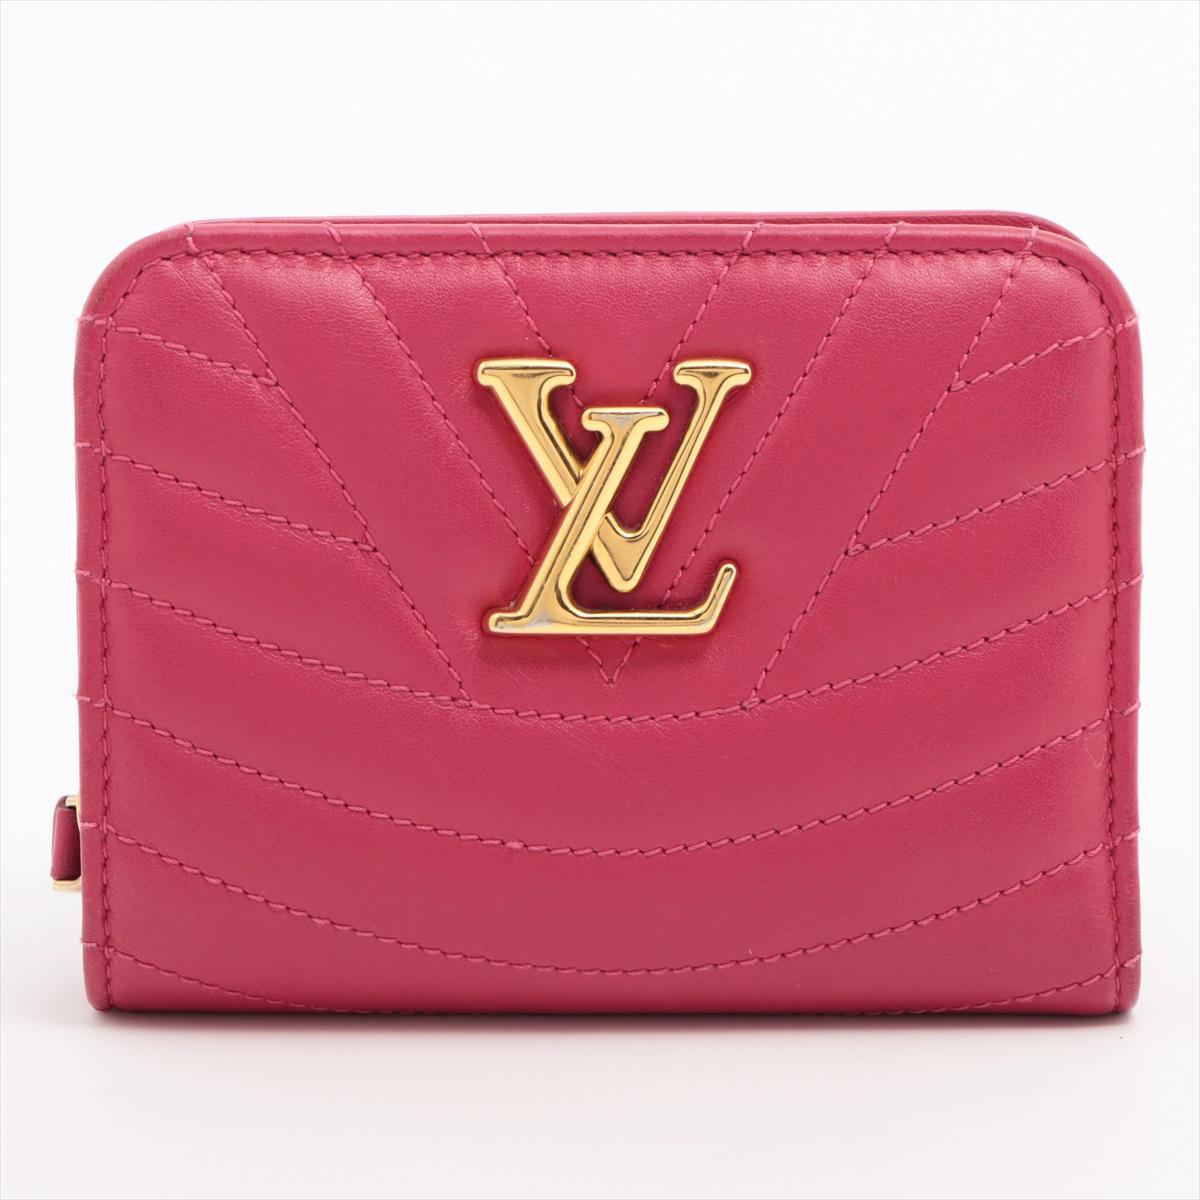 The Louis Vuitton New Wave Zipped Compact Wallet in Fuchsia is a stylish and compact accessory that adds a pop of color to any ensemble. Crafted from premium leather, the wallet showcases the brand's iconic New Wave design, featuring a wave-like